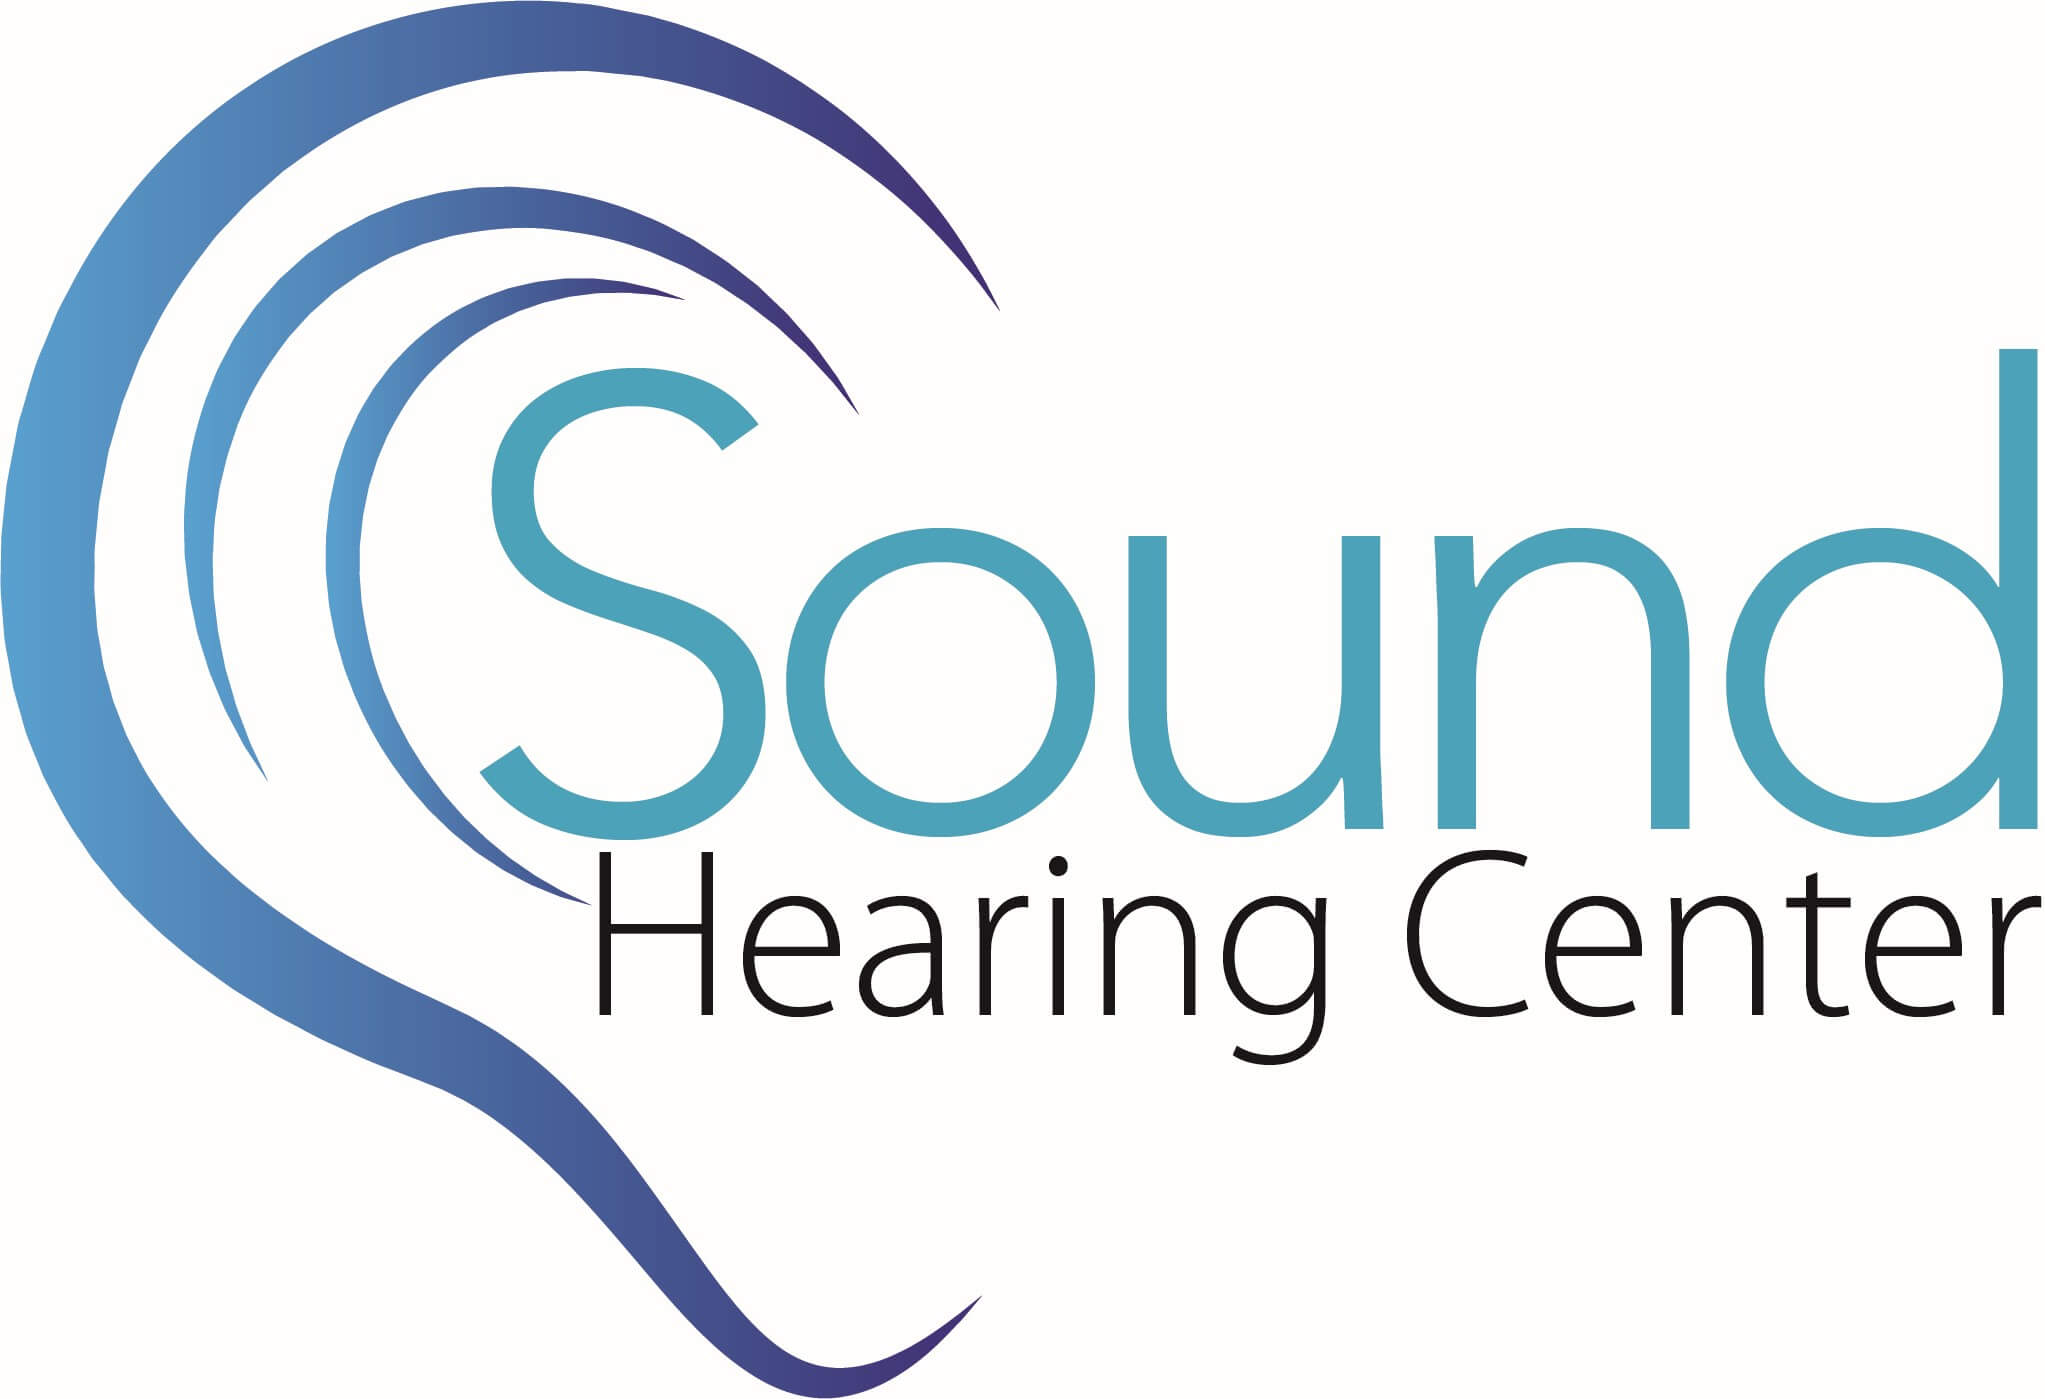 All Ear Doctors Hearing Aids